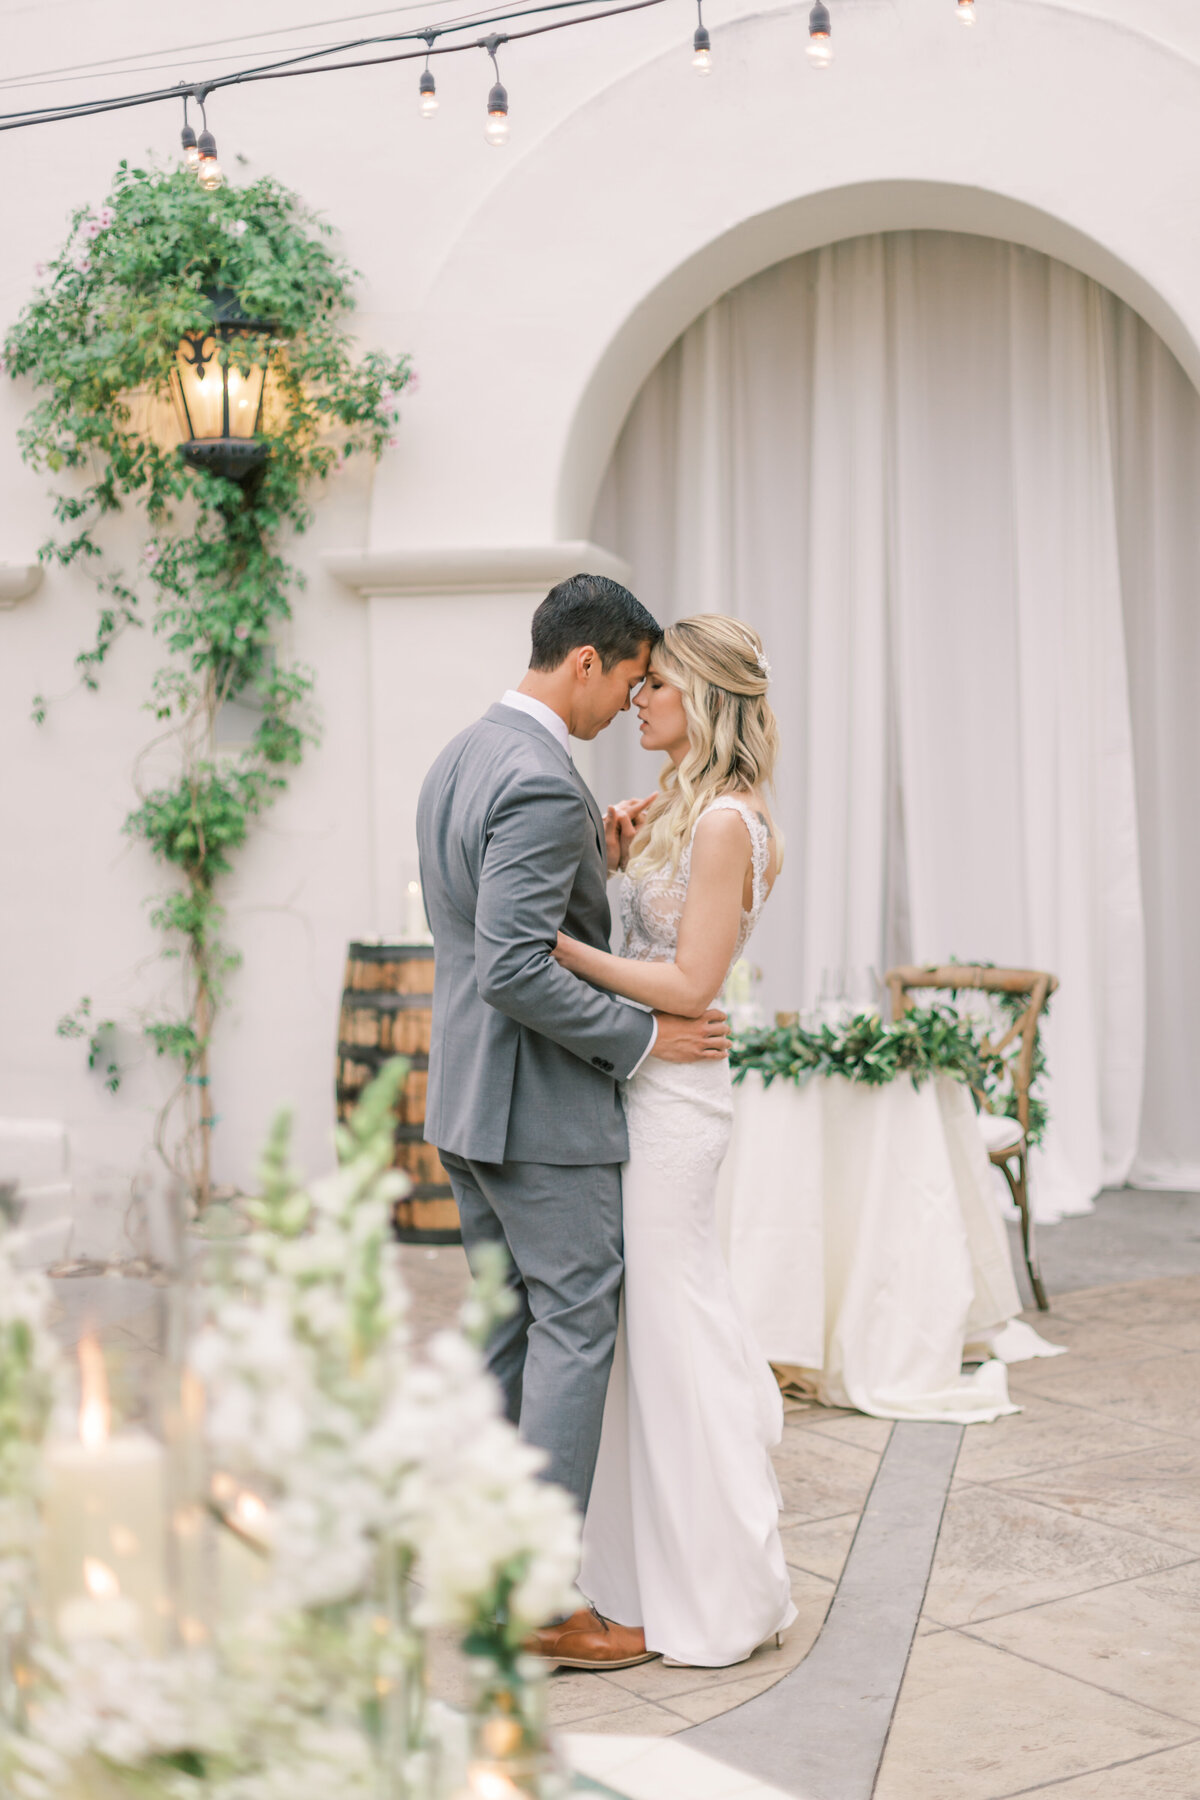 Jocelyn and Spencer Photography California Santa Barbara Wedding Engagement Luxury High End Romantic Imagery Light Airy Fineart Film Style18